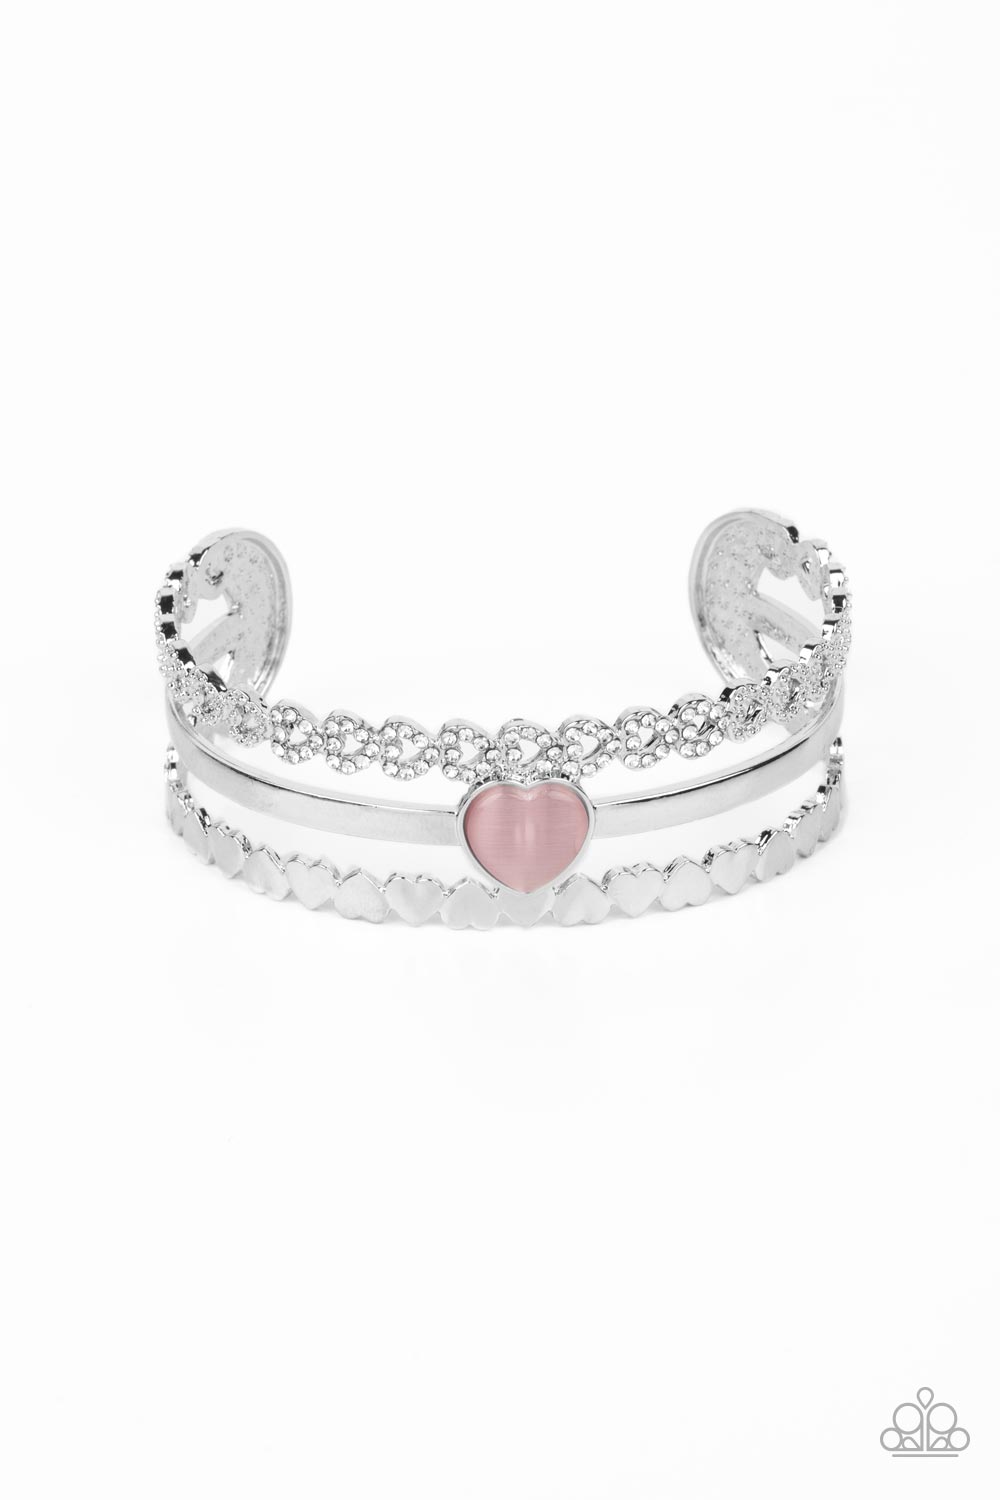 You Win My Heart - Pink and Silver Heart Bracelet - Paparazzi Accessories